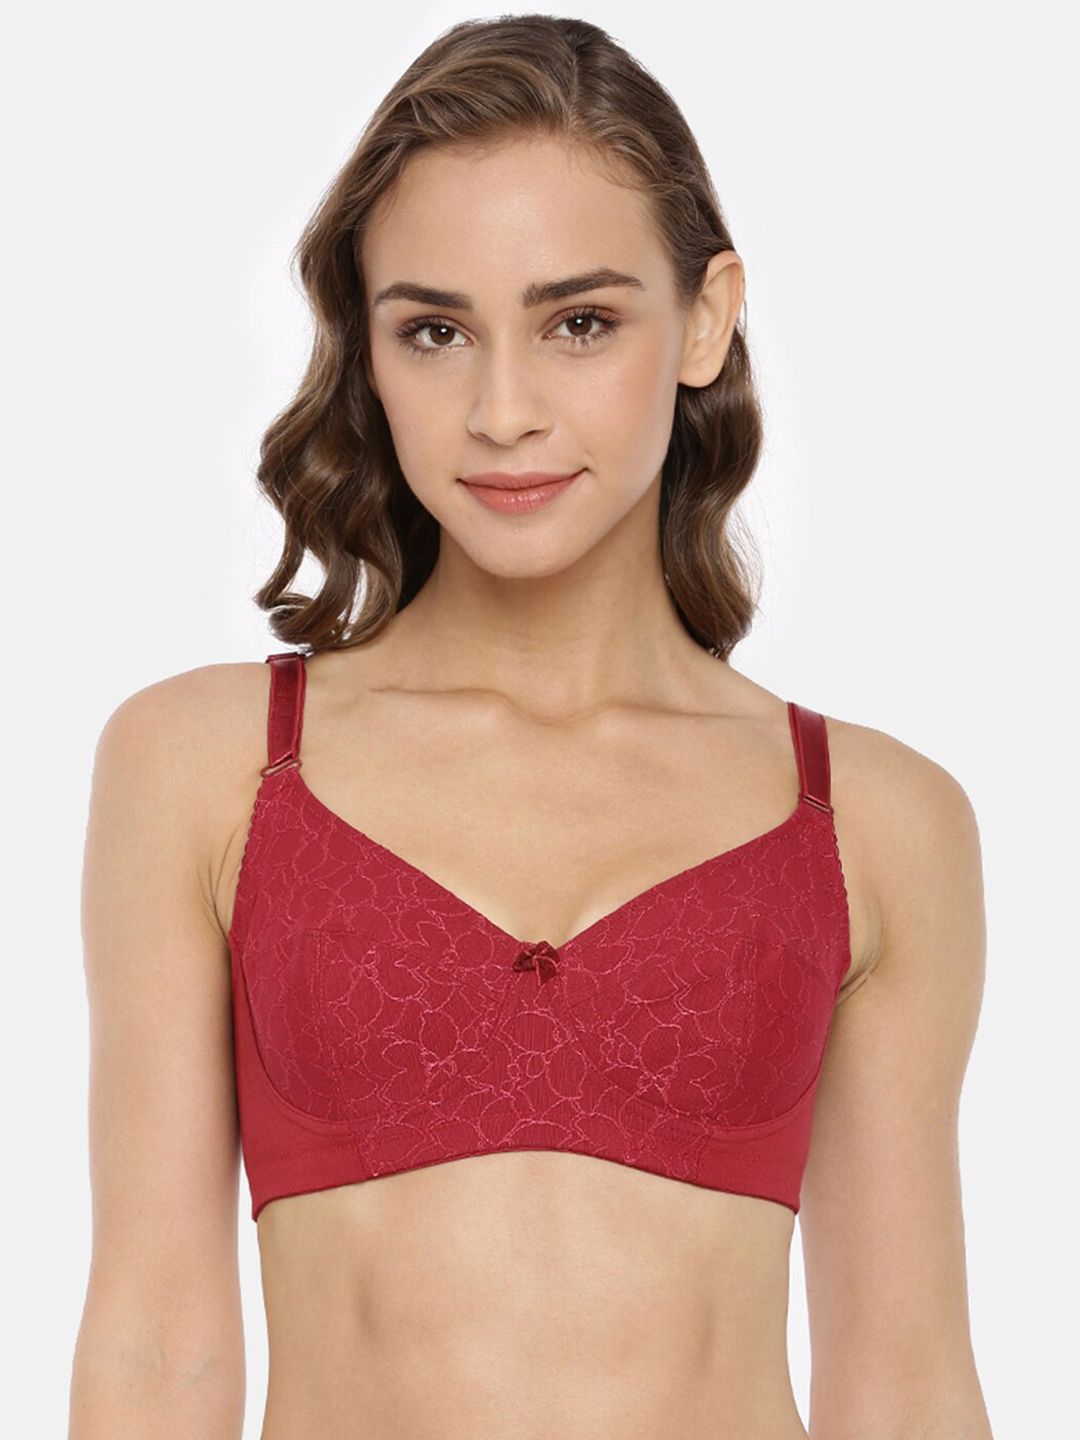 Buy Macrowoman W-Series Macrowoman W-Series Floral Lace Non Padded Cotton  Minimizer Bra With All Day Comfort at Redfynd